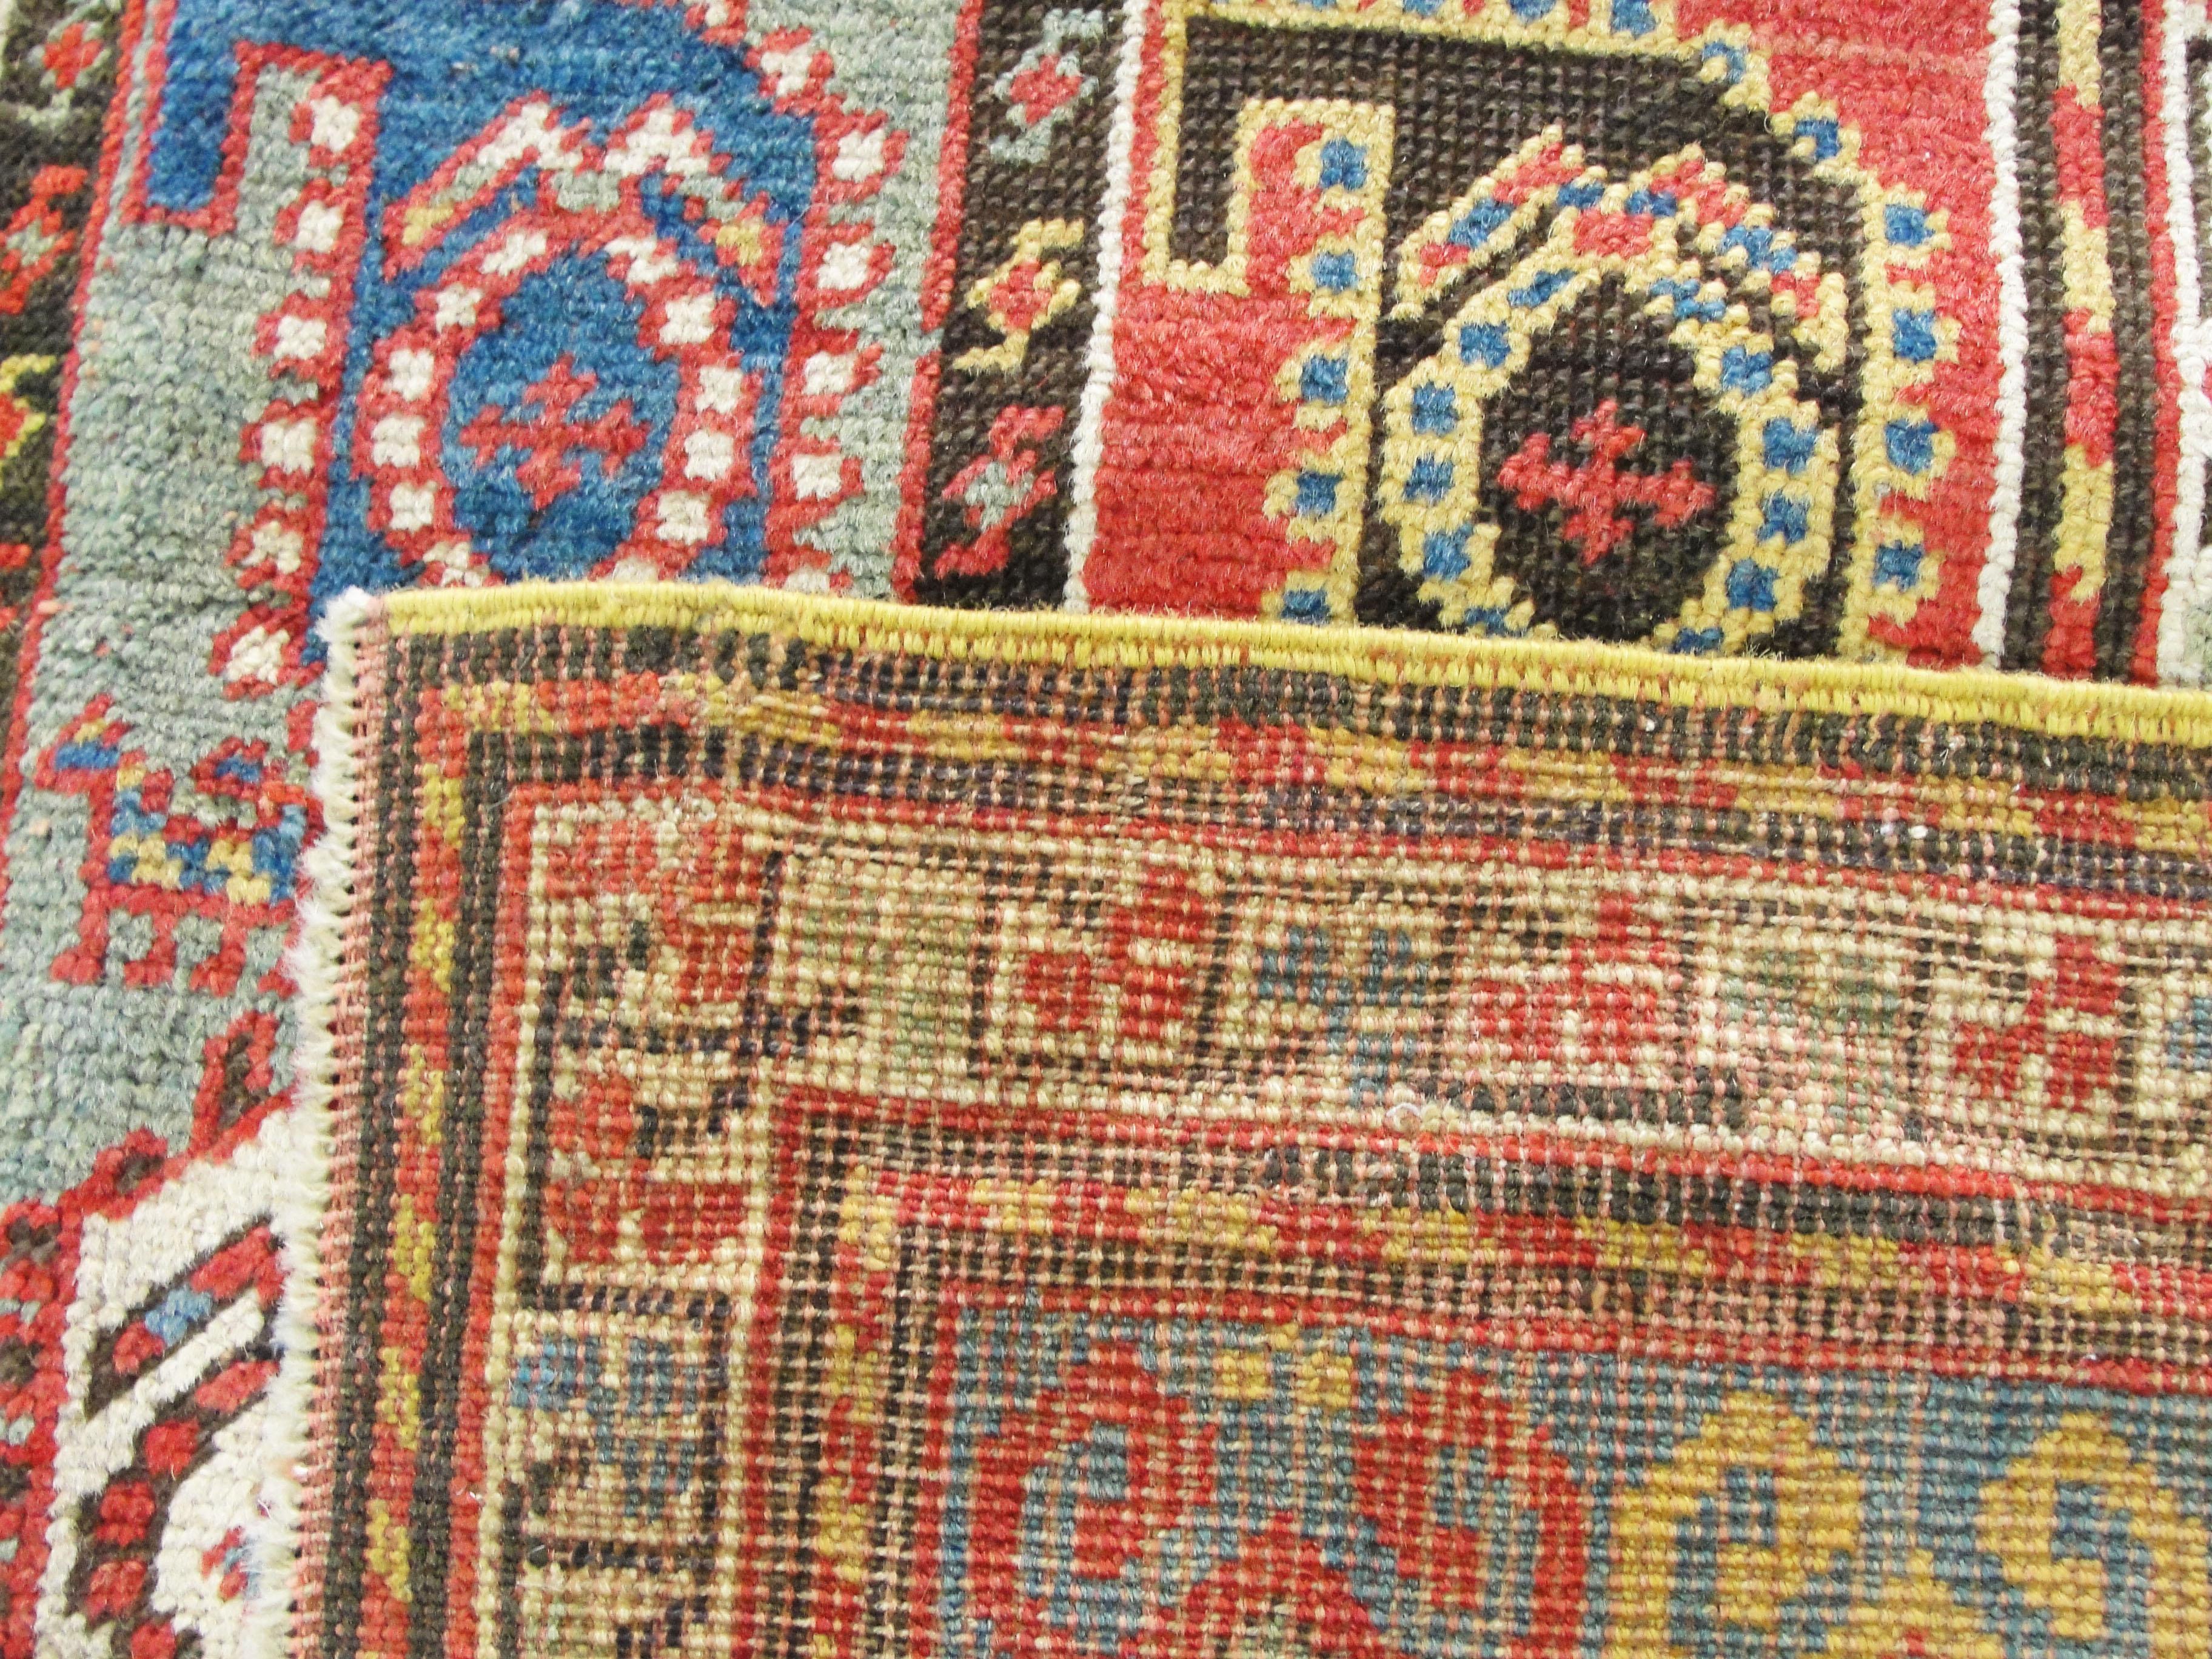 Highly unusual design antique colorful Kazak rug.
The Caucasus is bounded by the rugged mountains and lush valleys of Armenia, Azerbaijan and Georgia. This cultural melting pot was populated by Armenian dyers and weavers, Azeri Turks, groups from